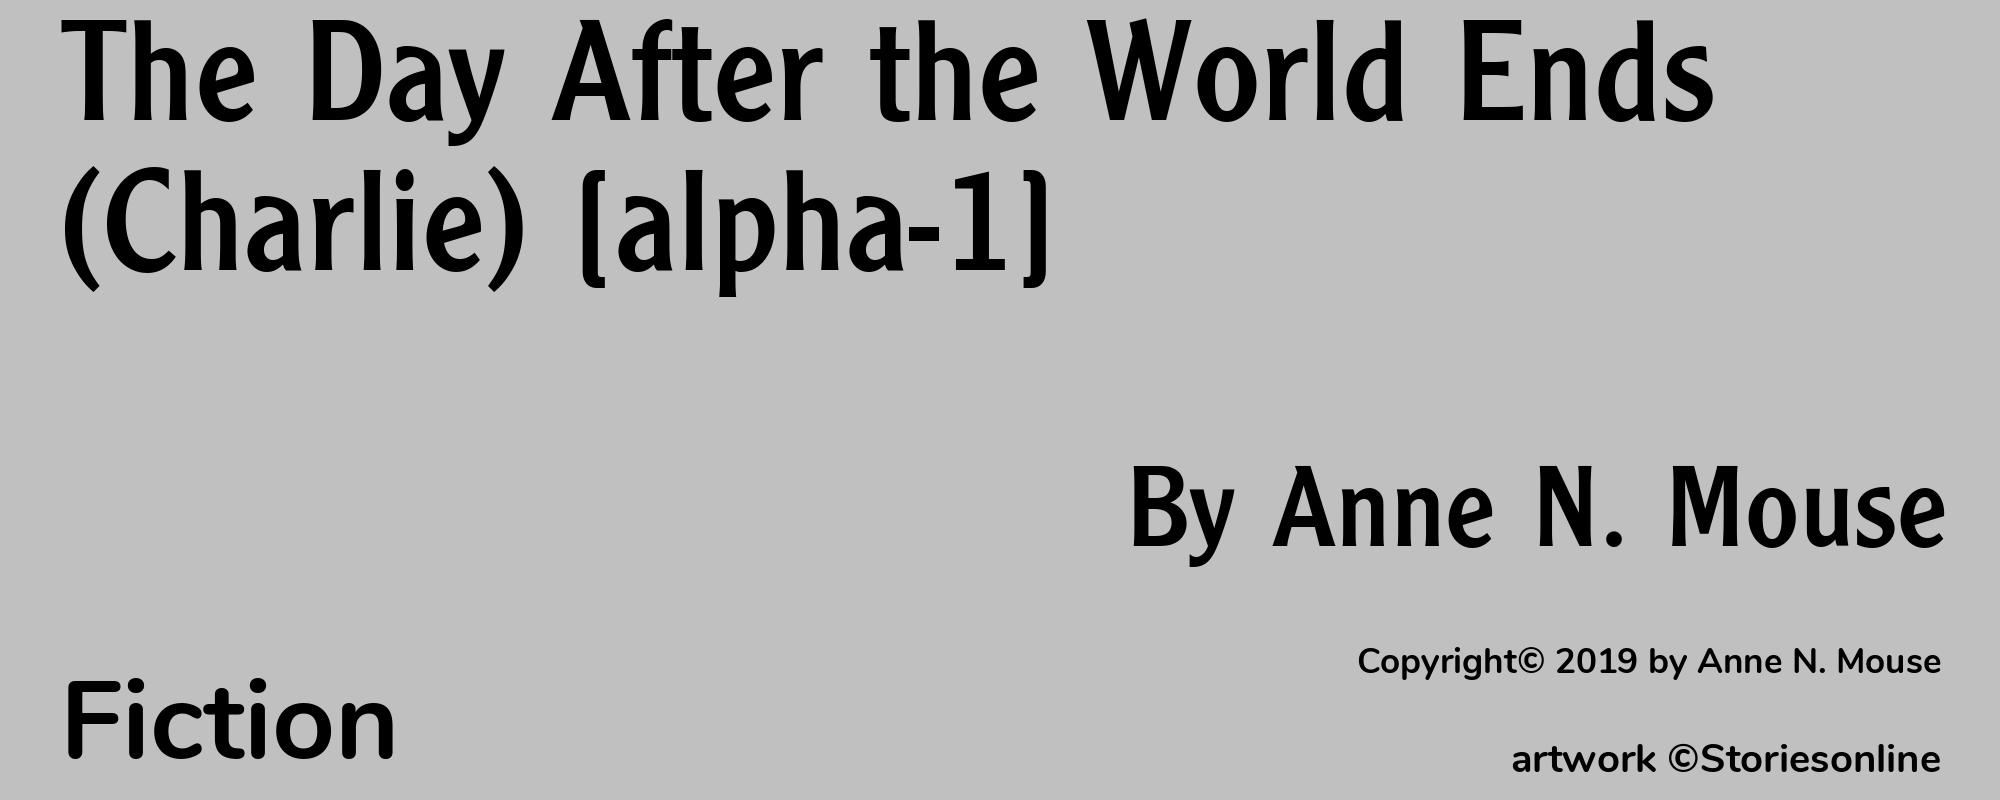 The Day After the World Ends (Charlie) [alpha-1] - Cover